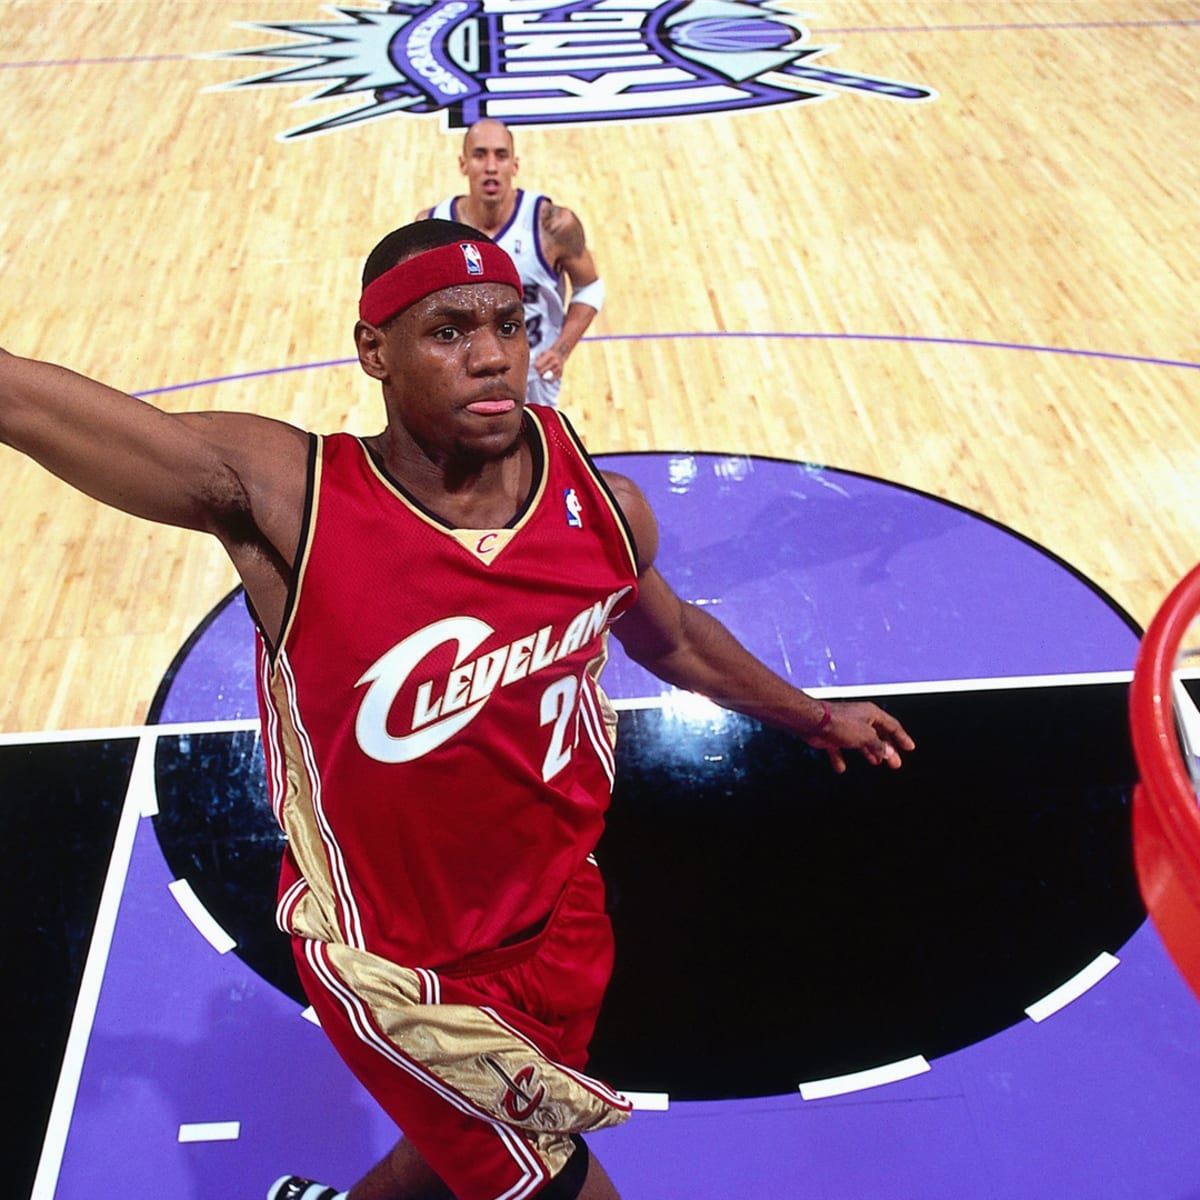 LeBron James in video games through the years